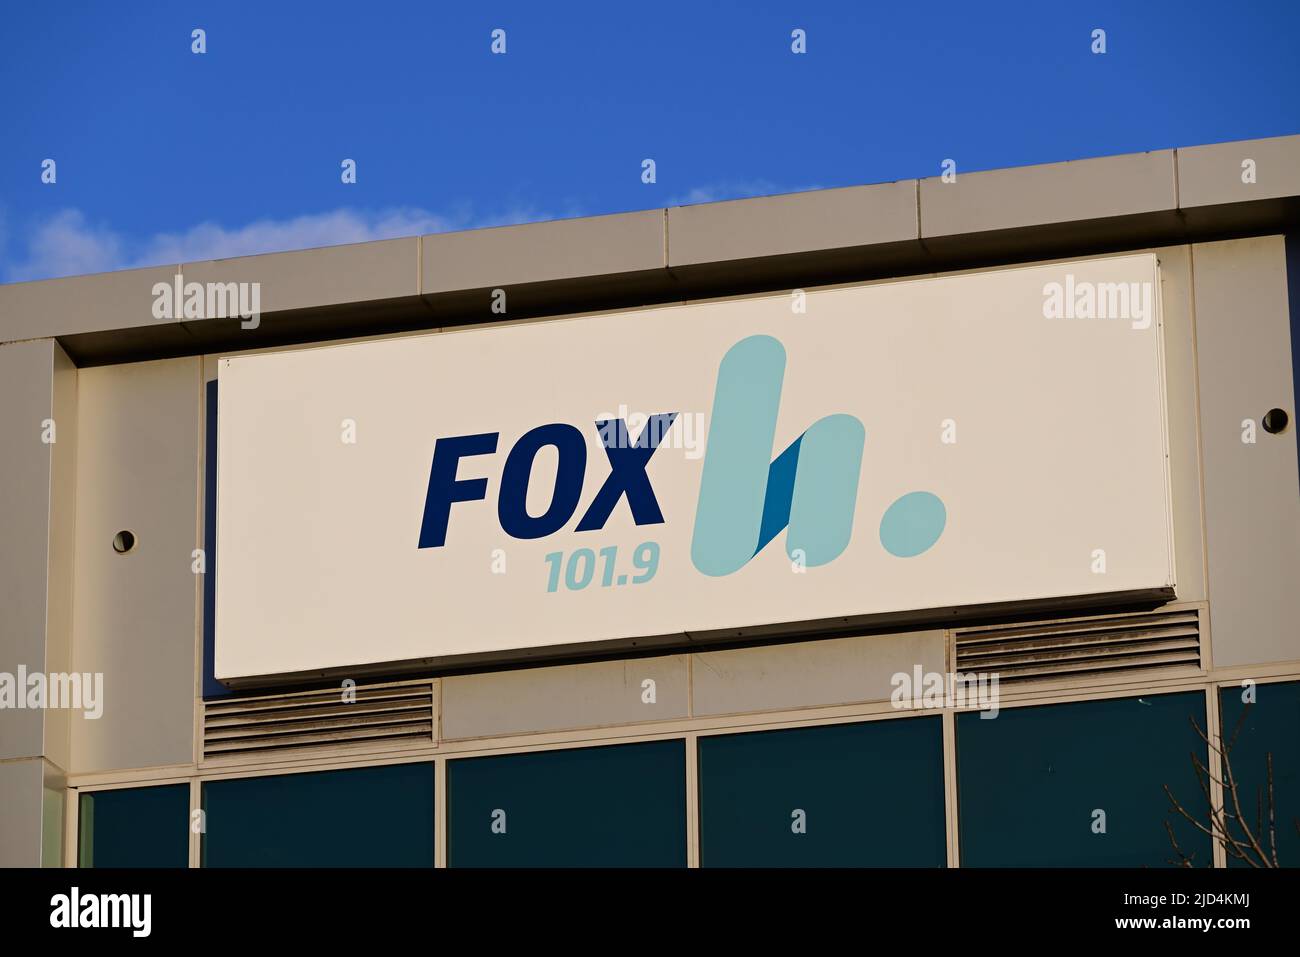 Fox FM radio station sign, featuring the station's logo and frequency, on  the side of their studios building during the late afternoon Stock Photo -  Alamy